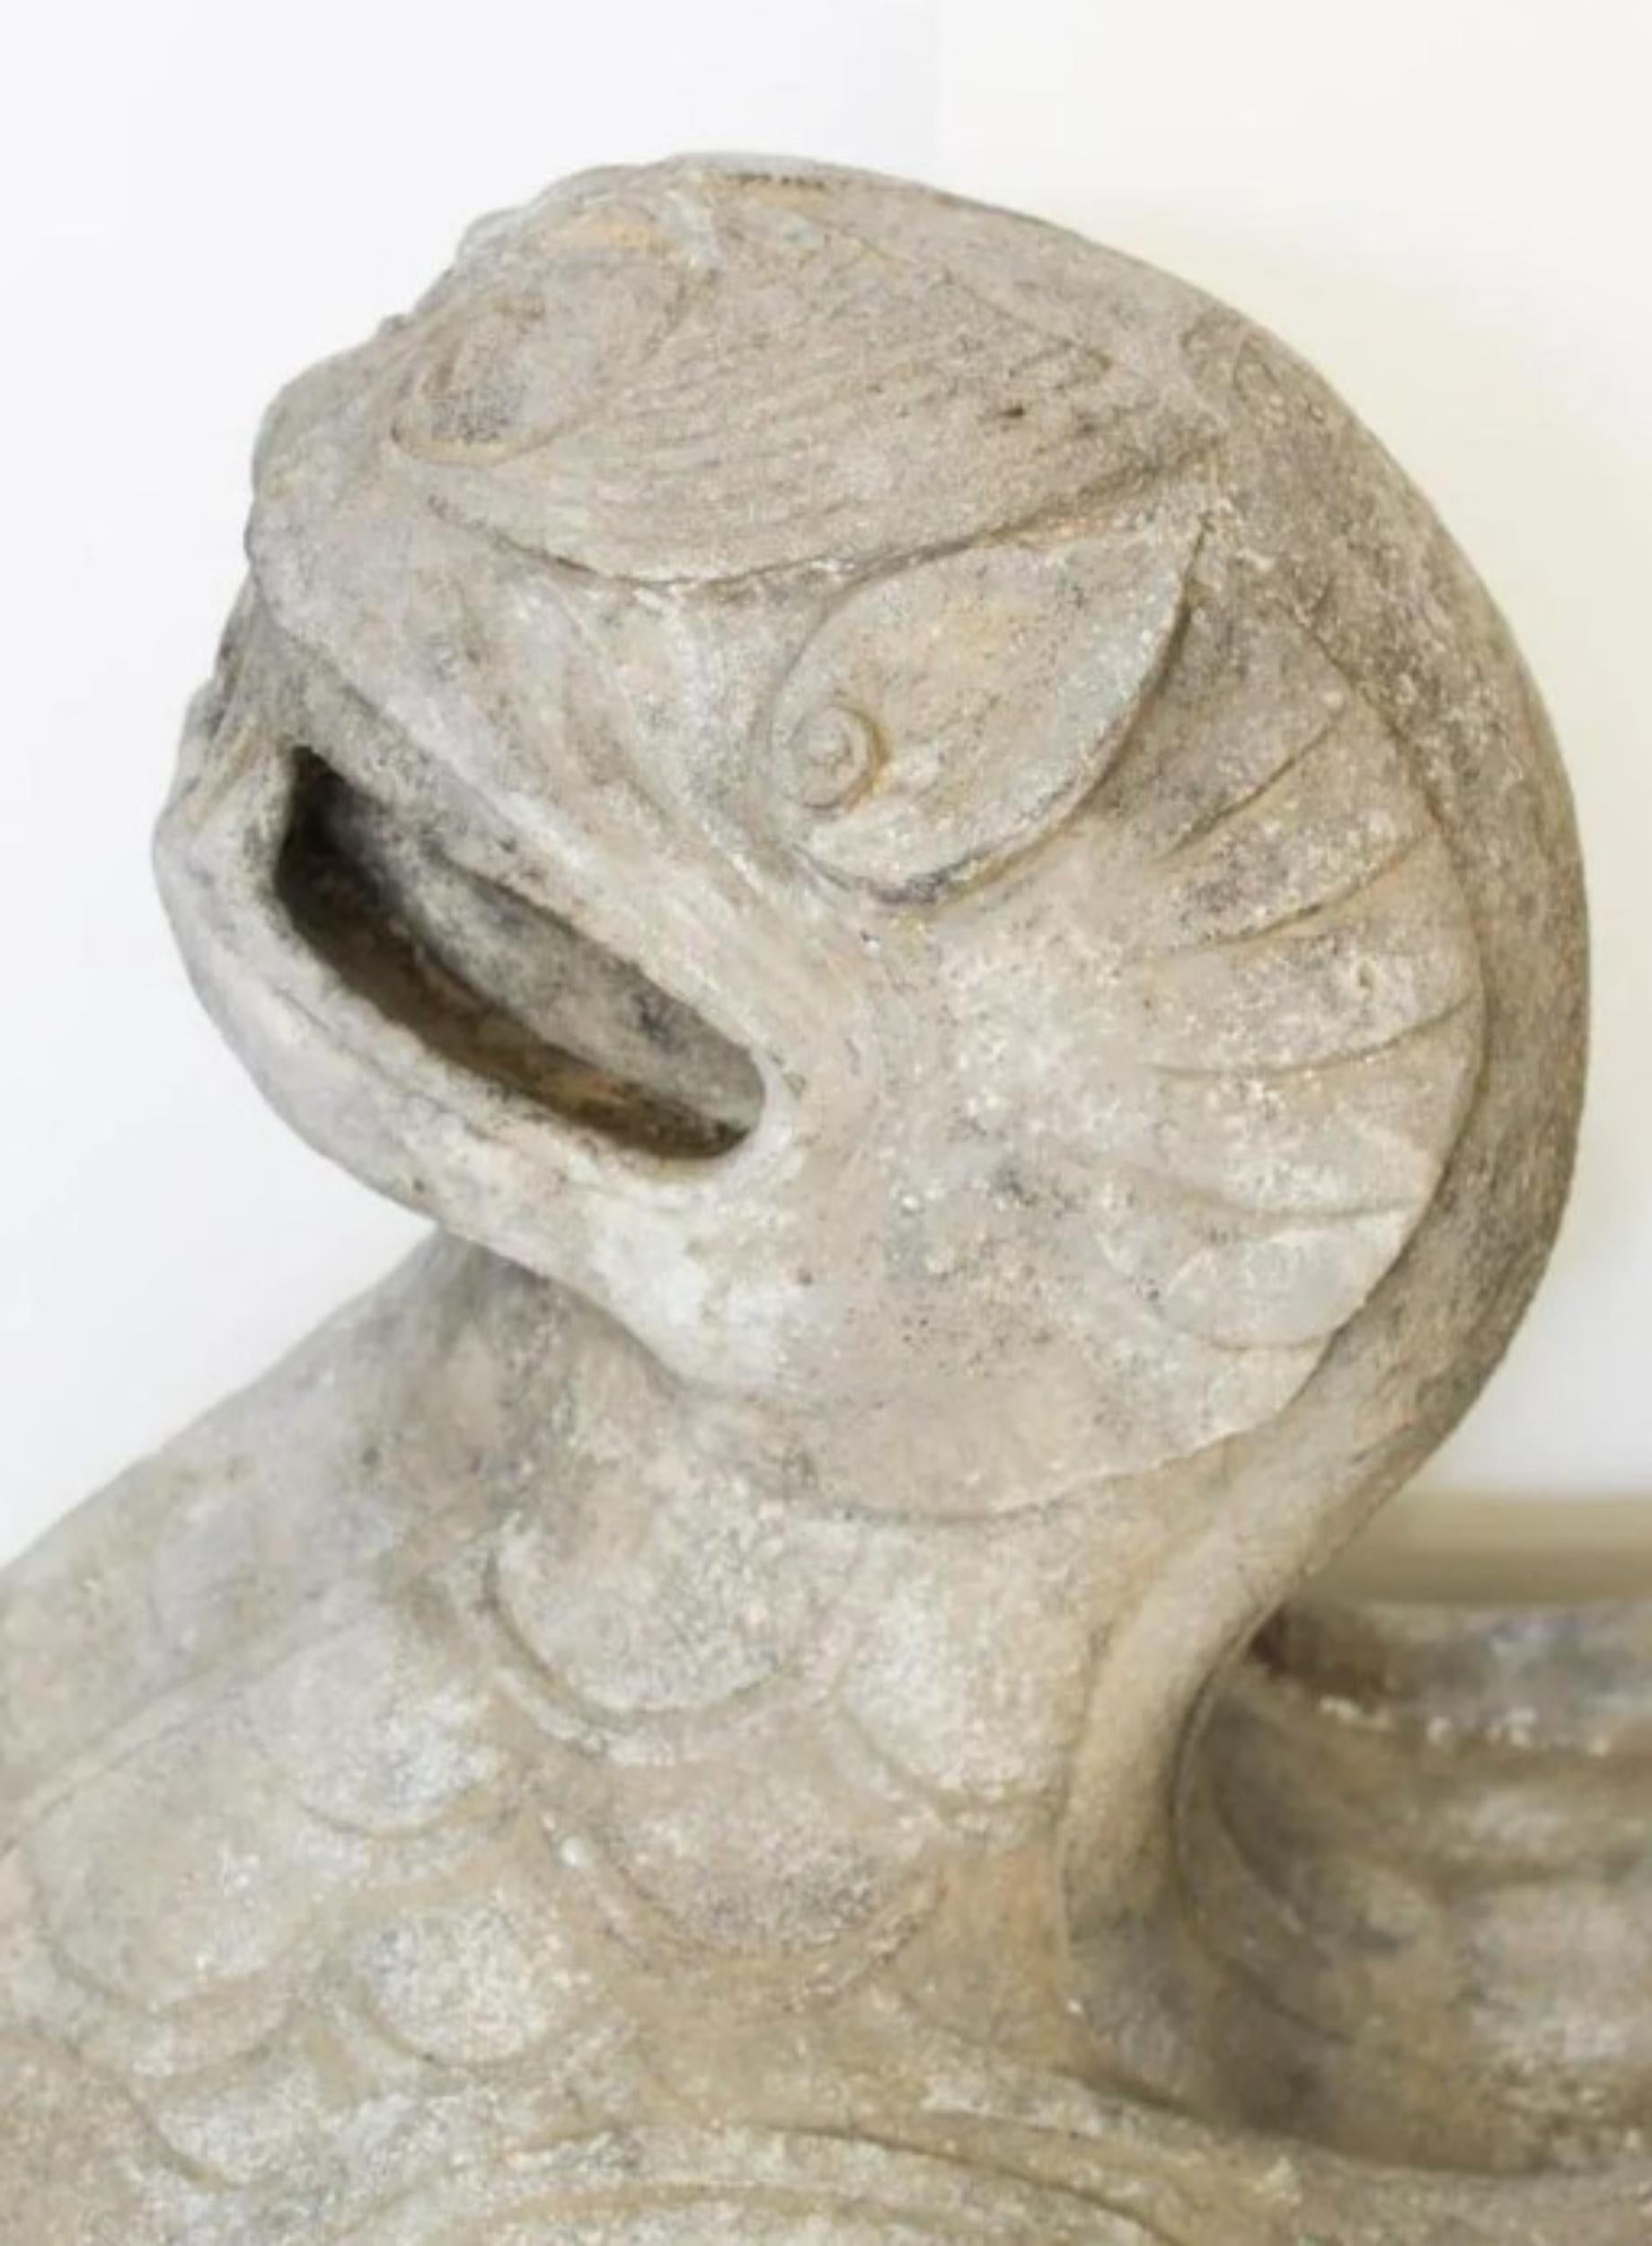 Rare Early Chinese Limestone Tomb Guardian-Tianlu. Late Han through Liang Dynasty, 200 BCE – 550 CE. The offered large scale stone carving is one of a number of mythical stylized lion-like winged guardians known as either Tianlu, (heavenly